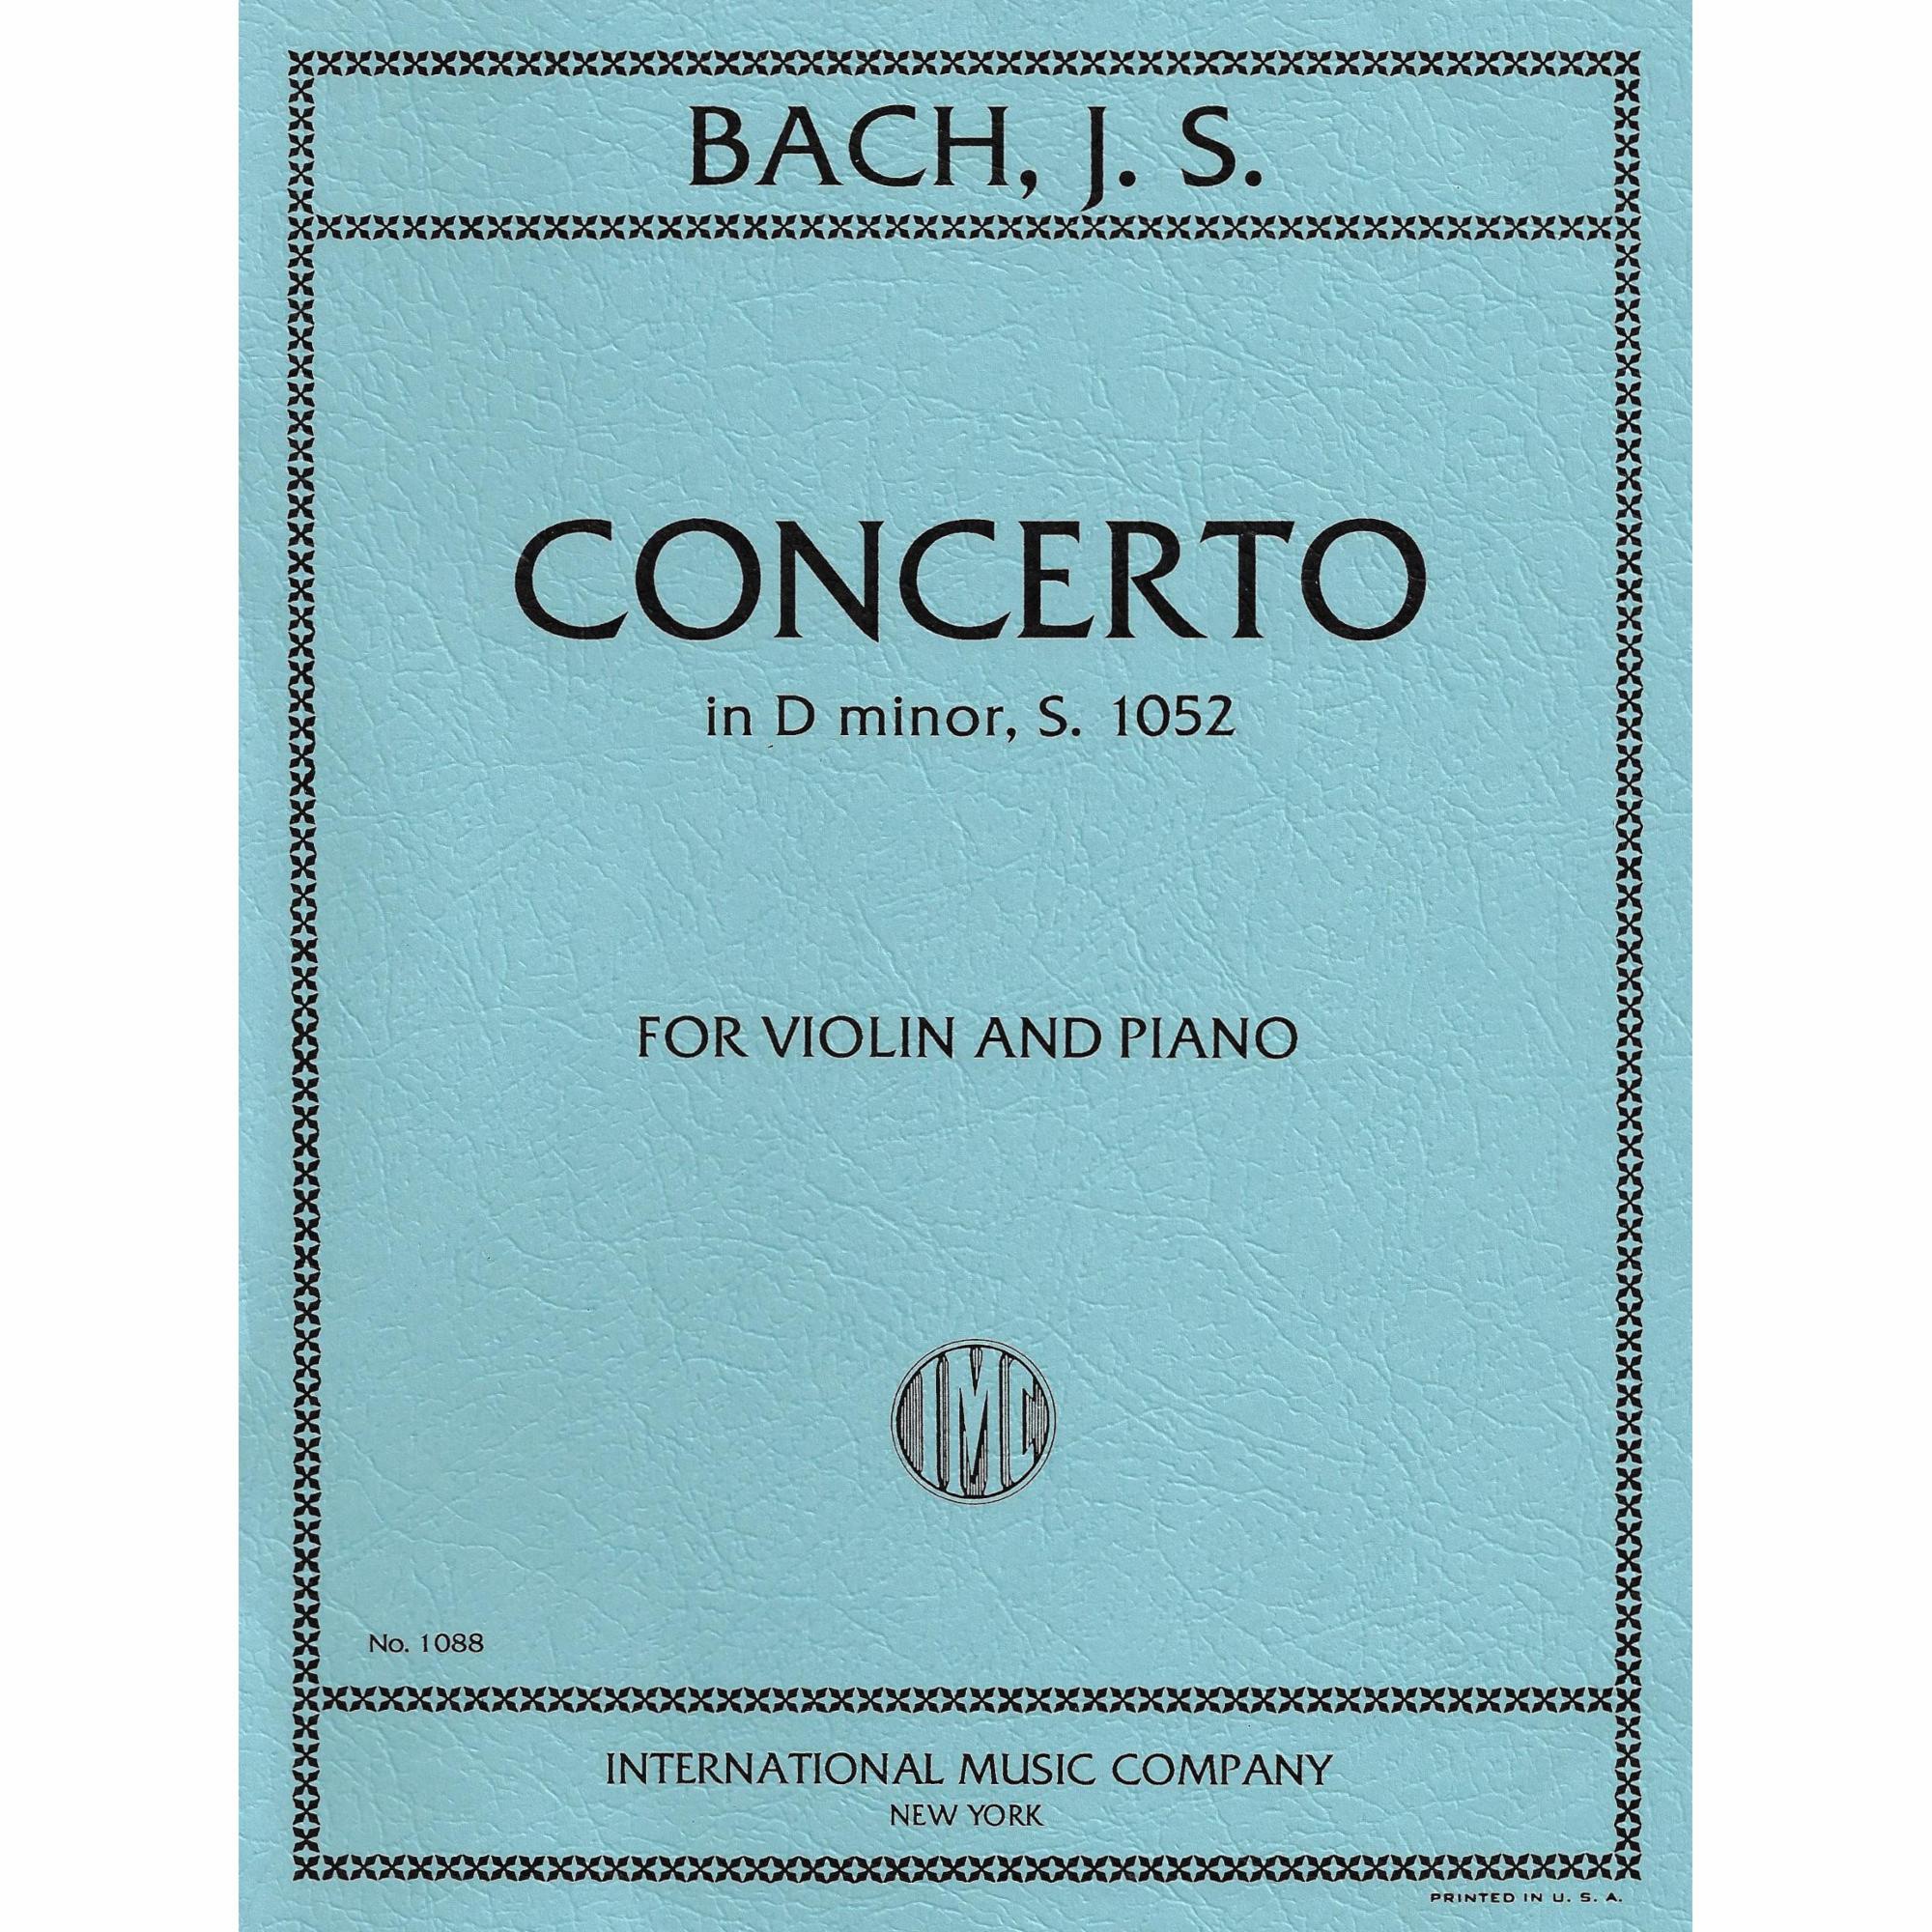 Bach -- Concerto in D Minor, S. 1052 for Violin and Piano